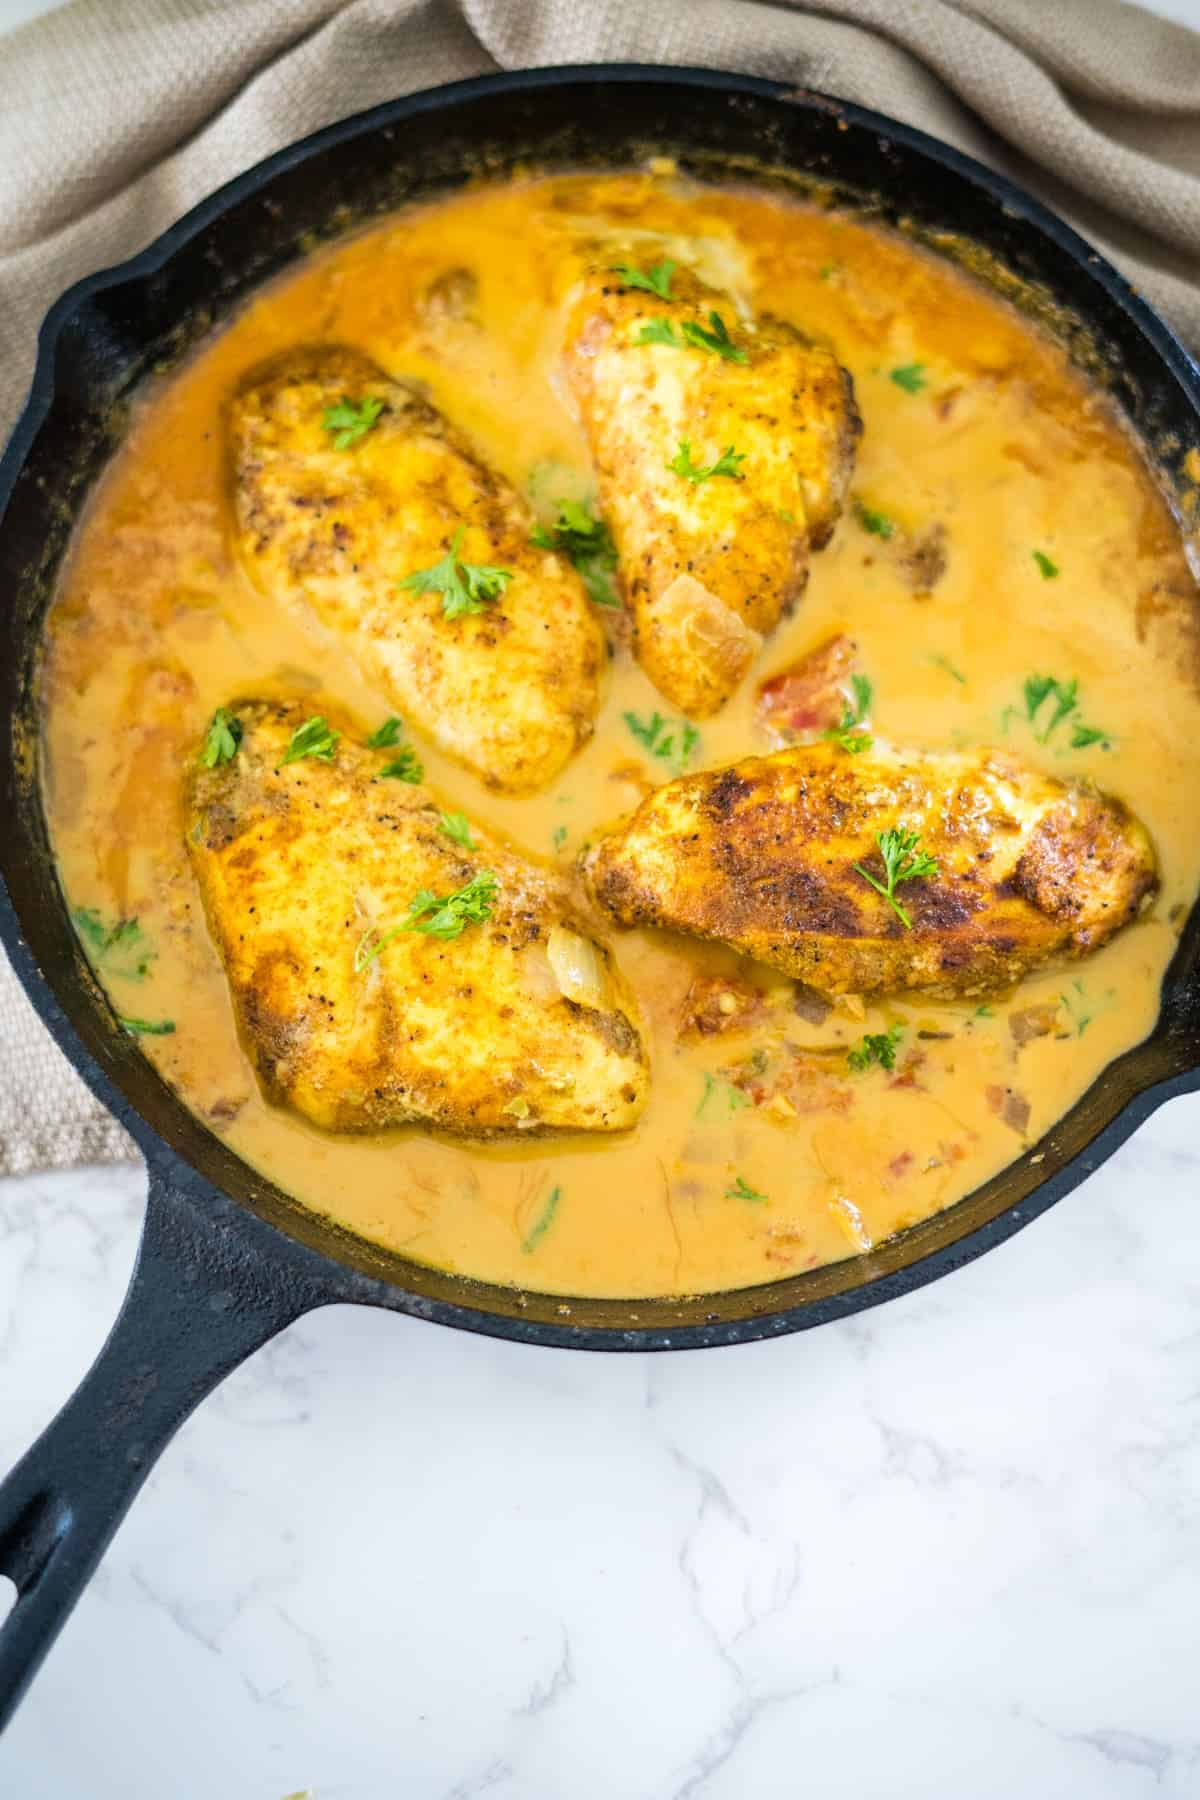 A Brazilian coconut chicken dish cooked in a cast iron skillet with a creamy sauce.